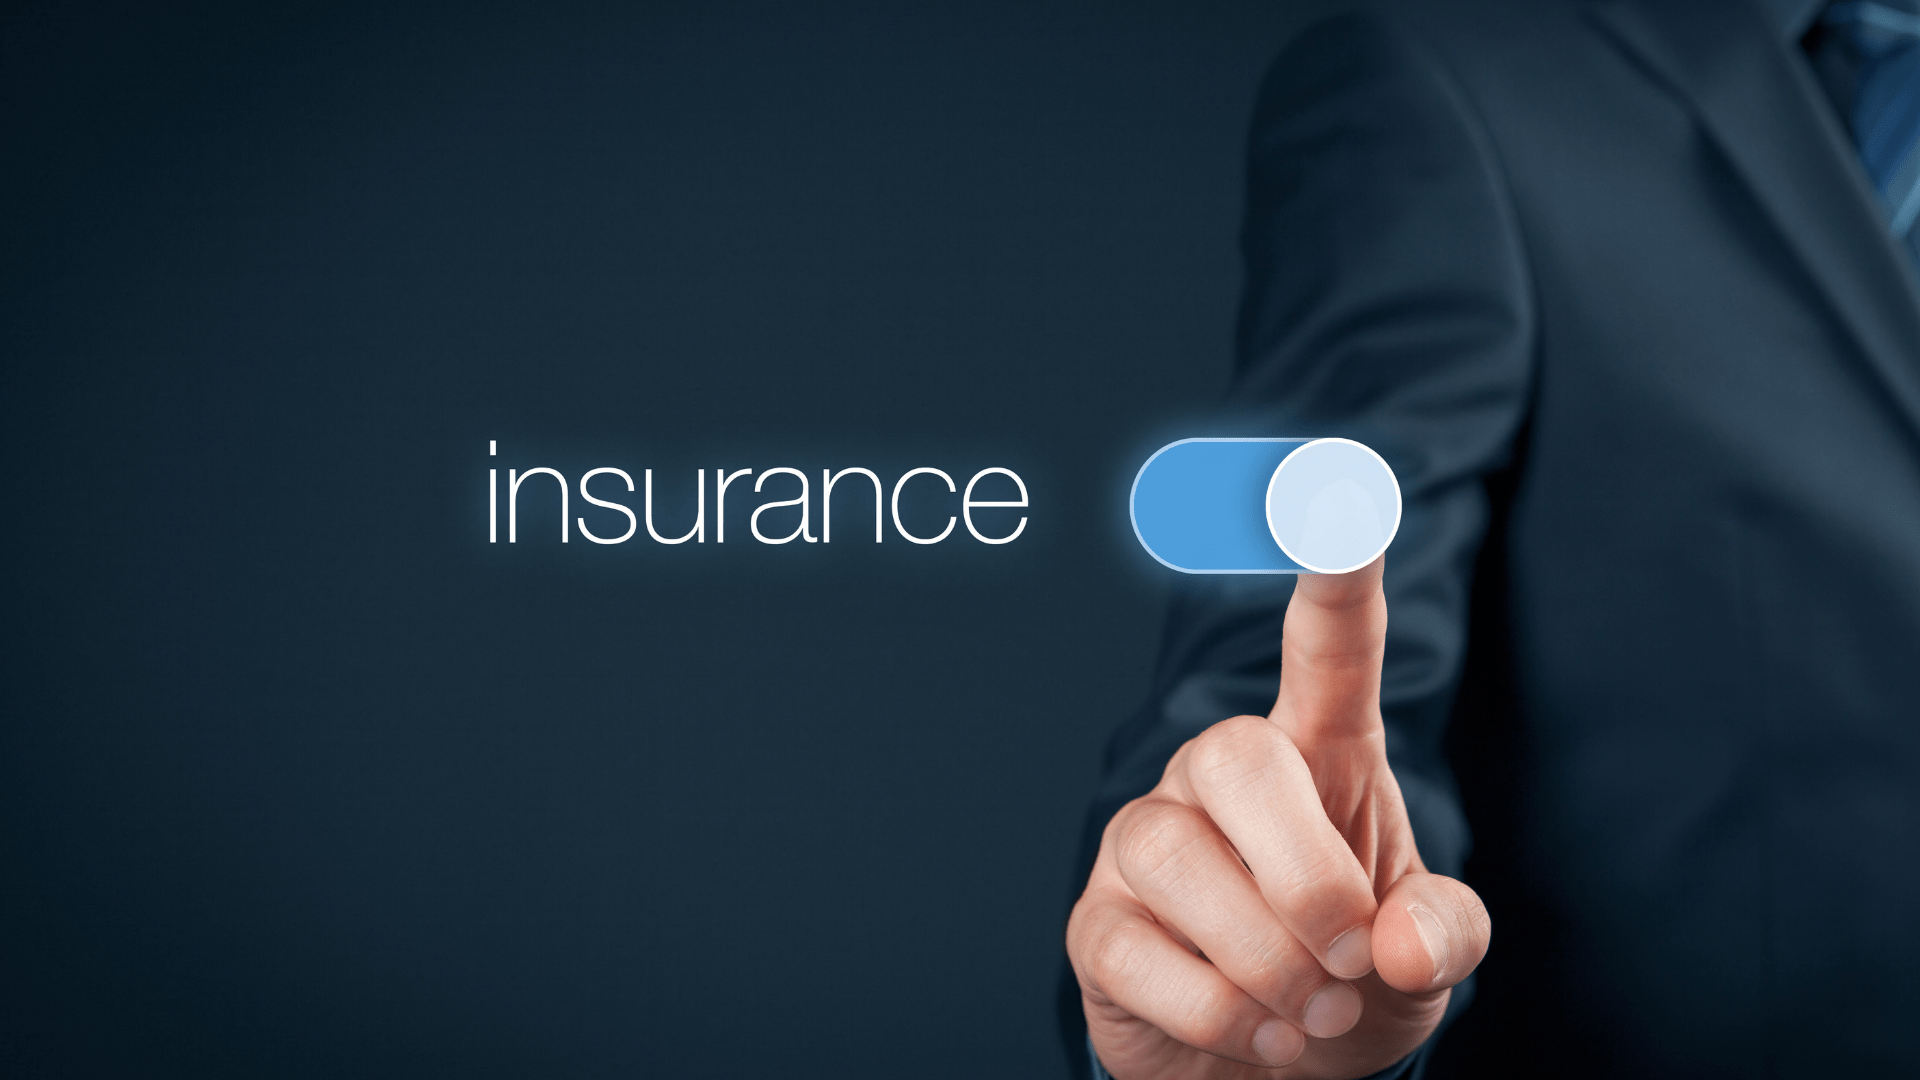 What-goes-hand-in-hand-for-insurers-min